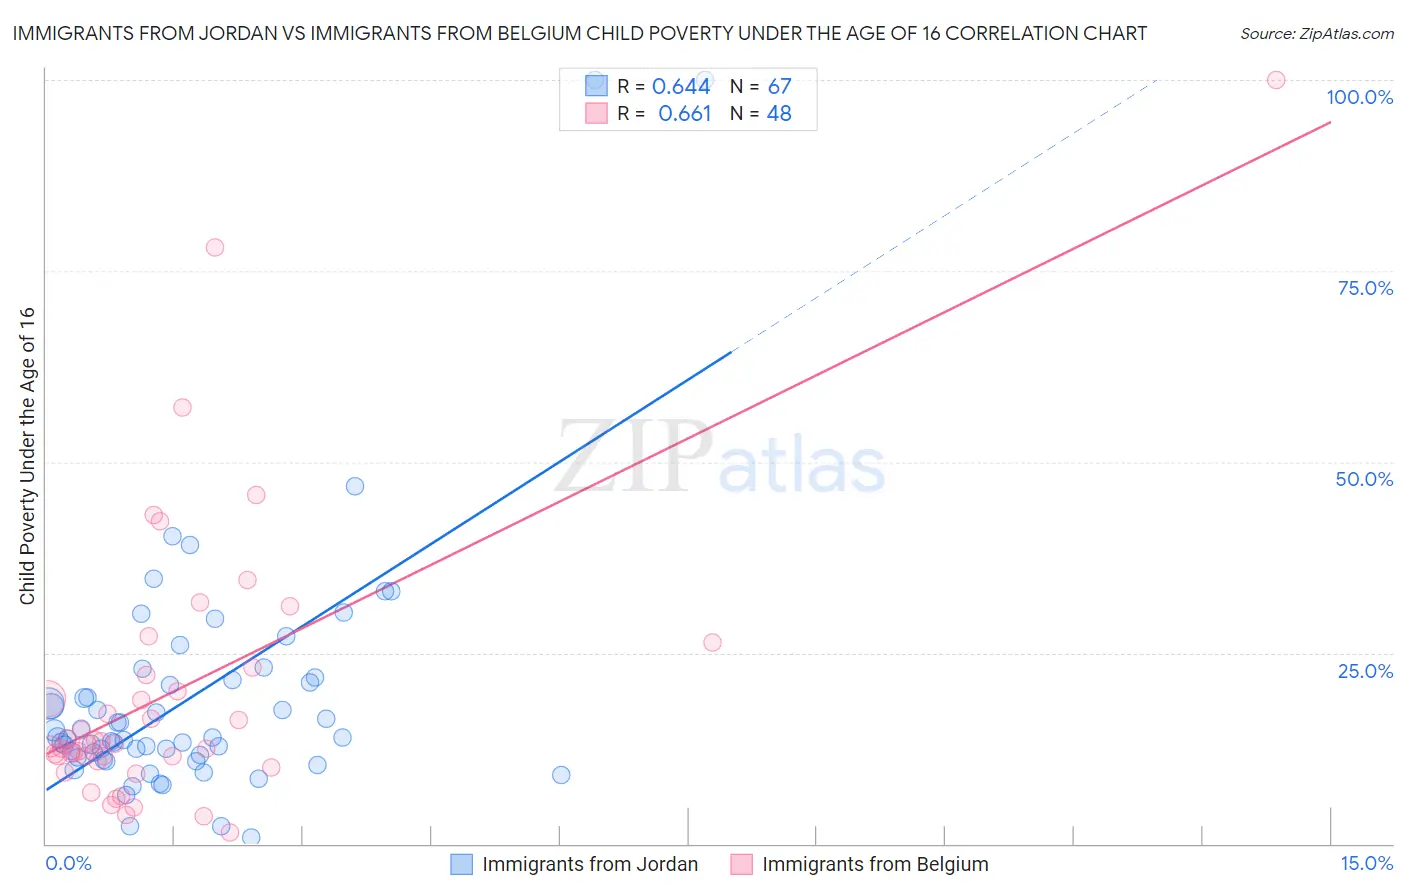 Immigrants from Jordan vs Immigrants from Belgium Child Poverty Under the Age of 16